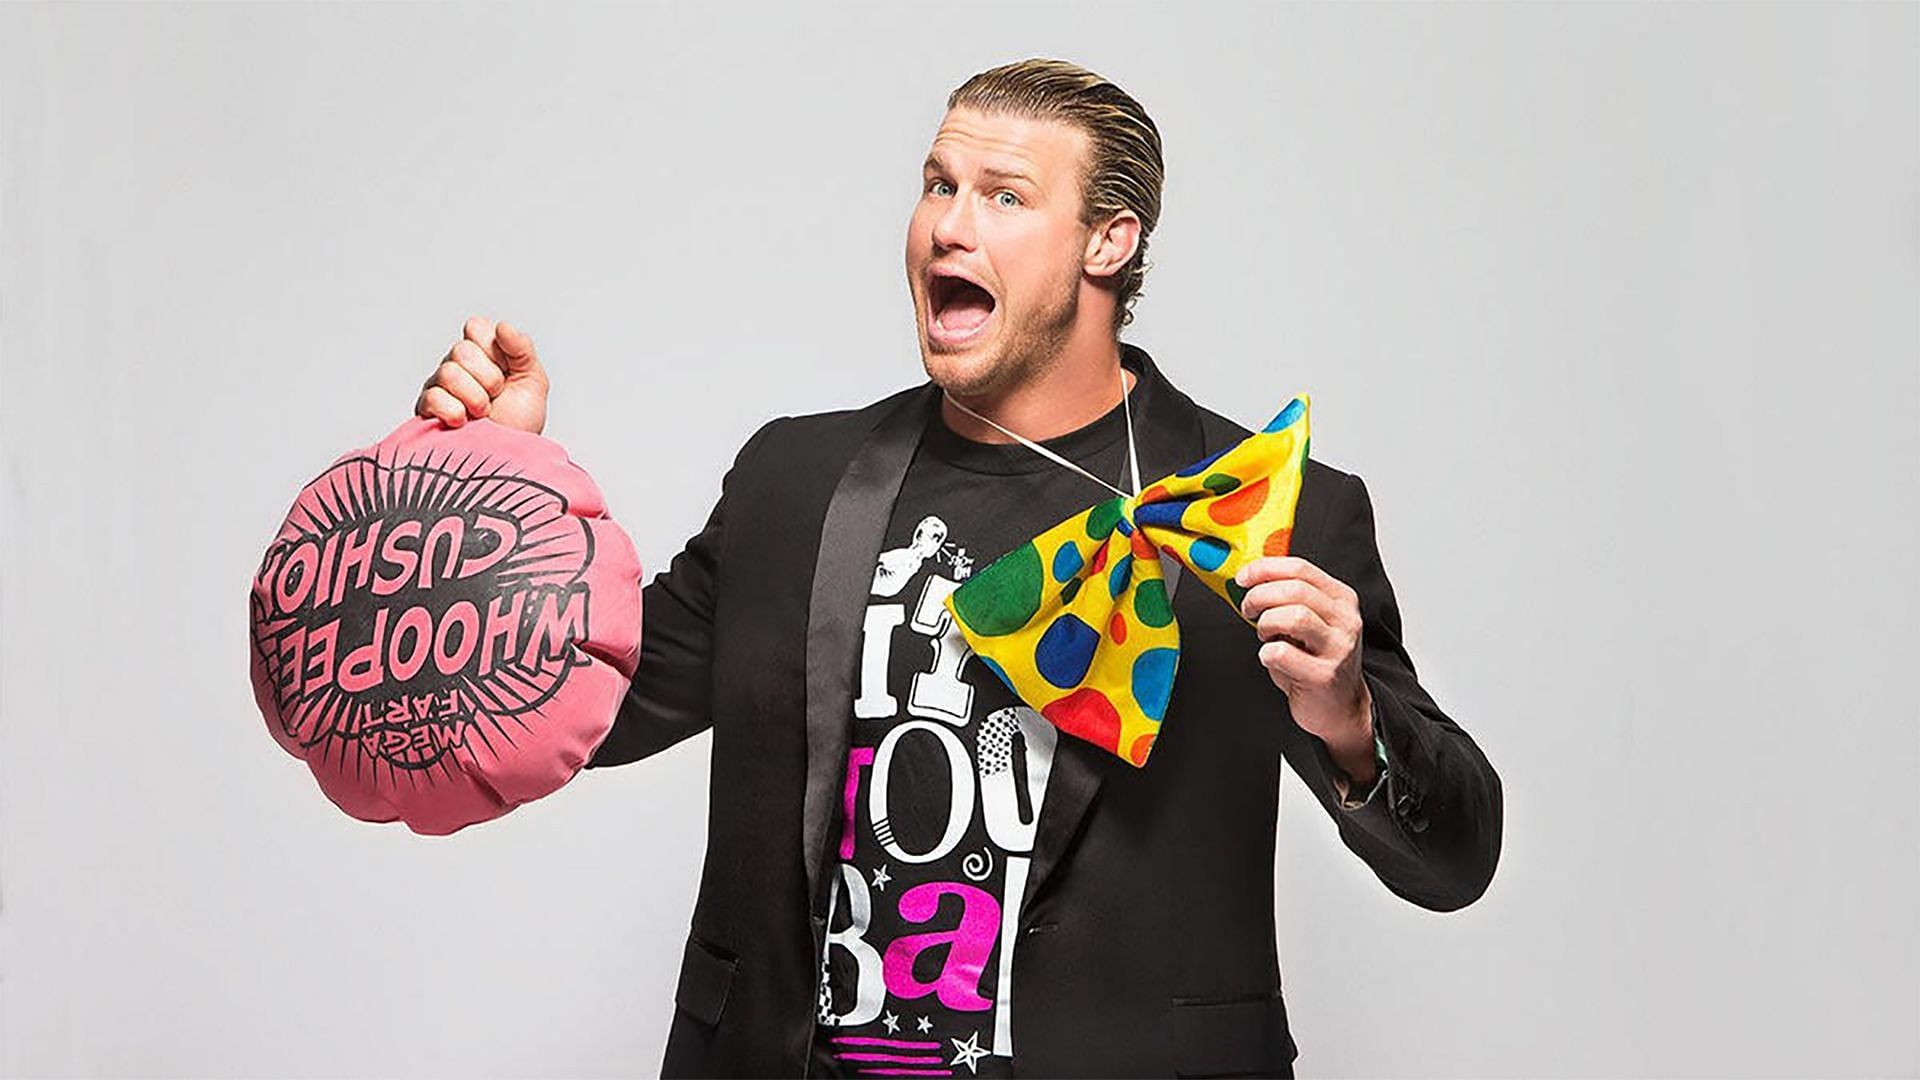 Dolph Ziggler poses for his first comedy photo shoot